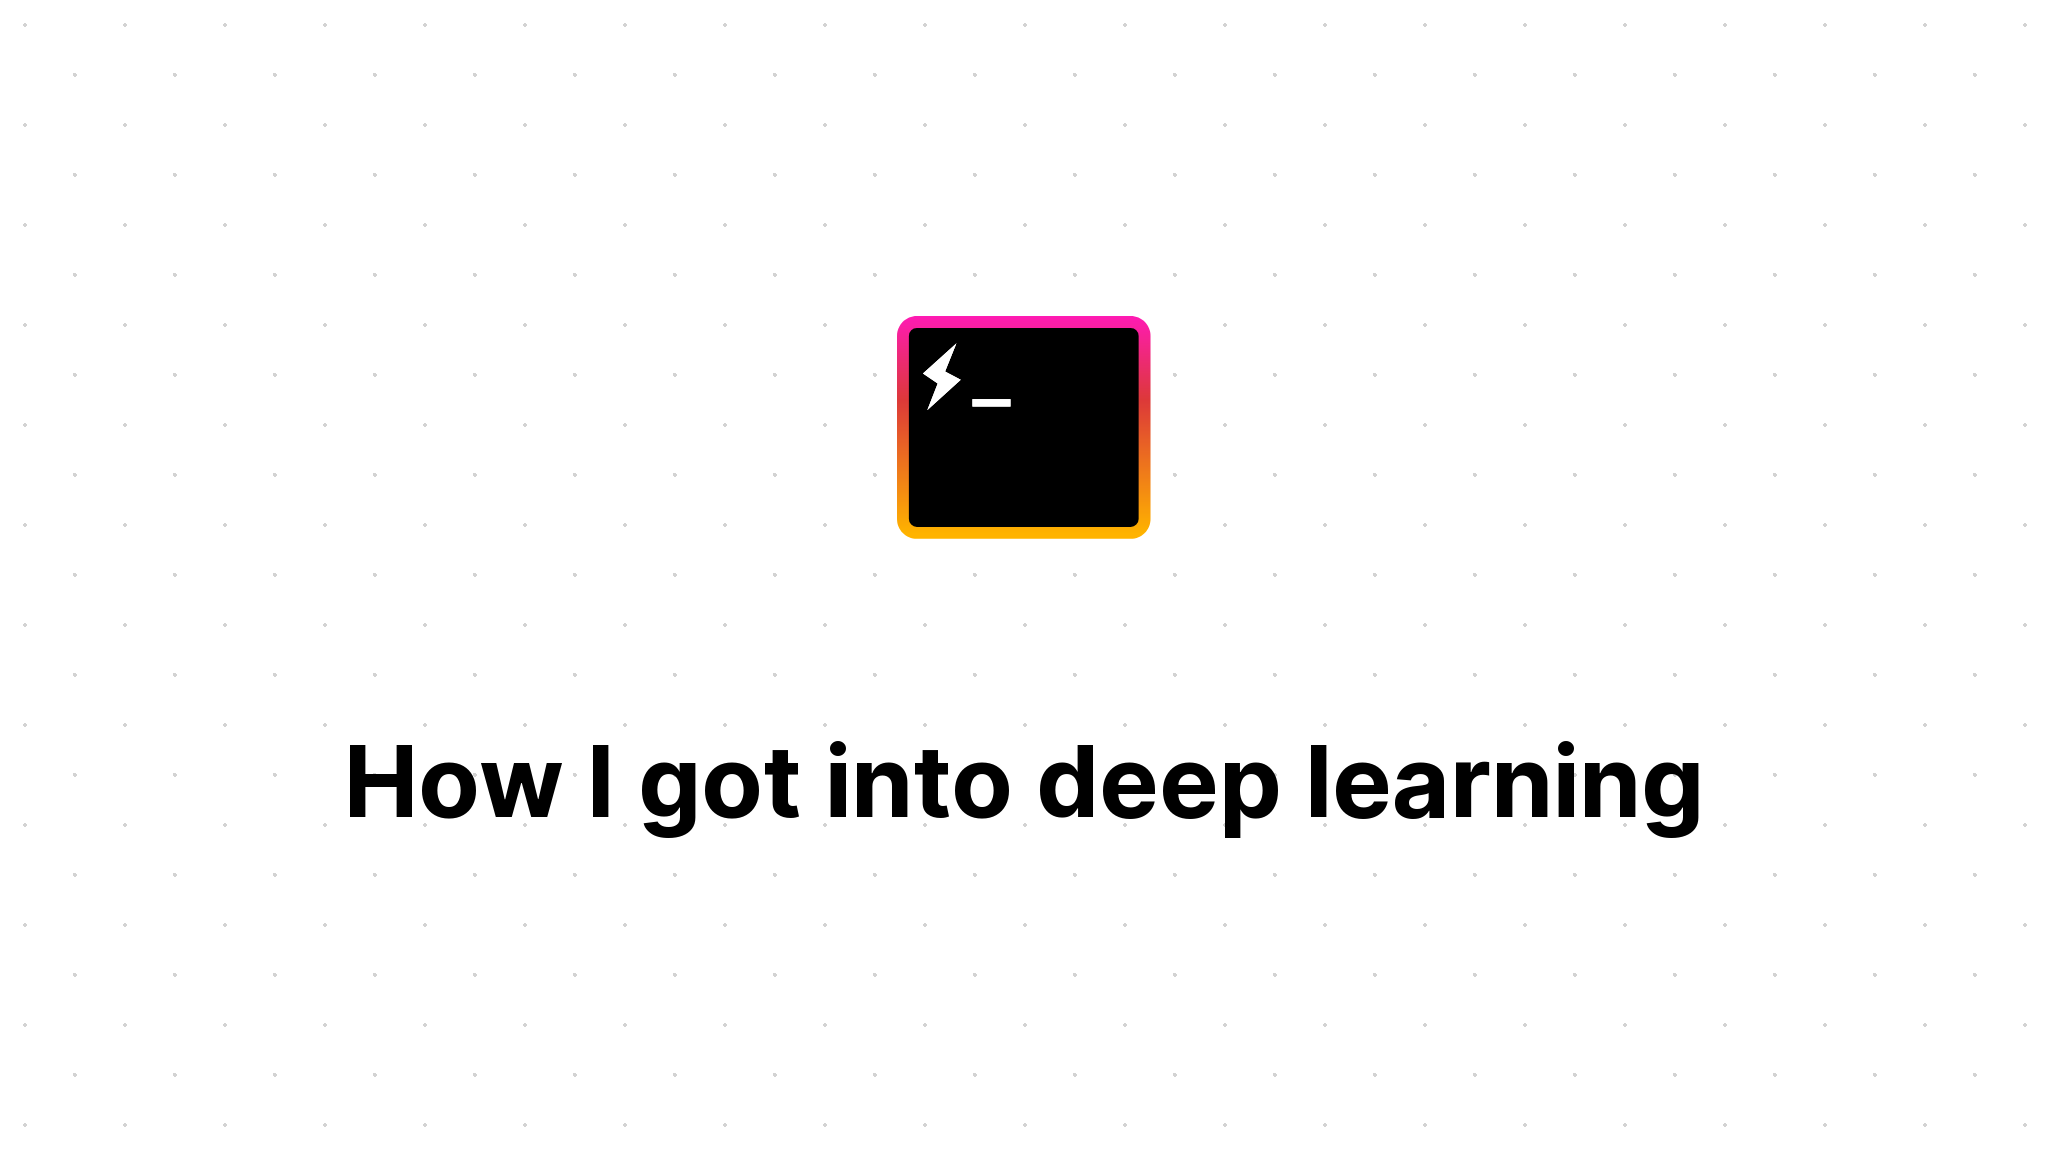 How I got into deep learning (8 minute read)